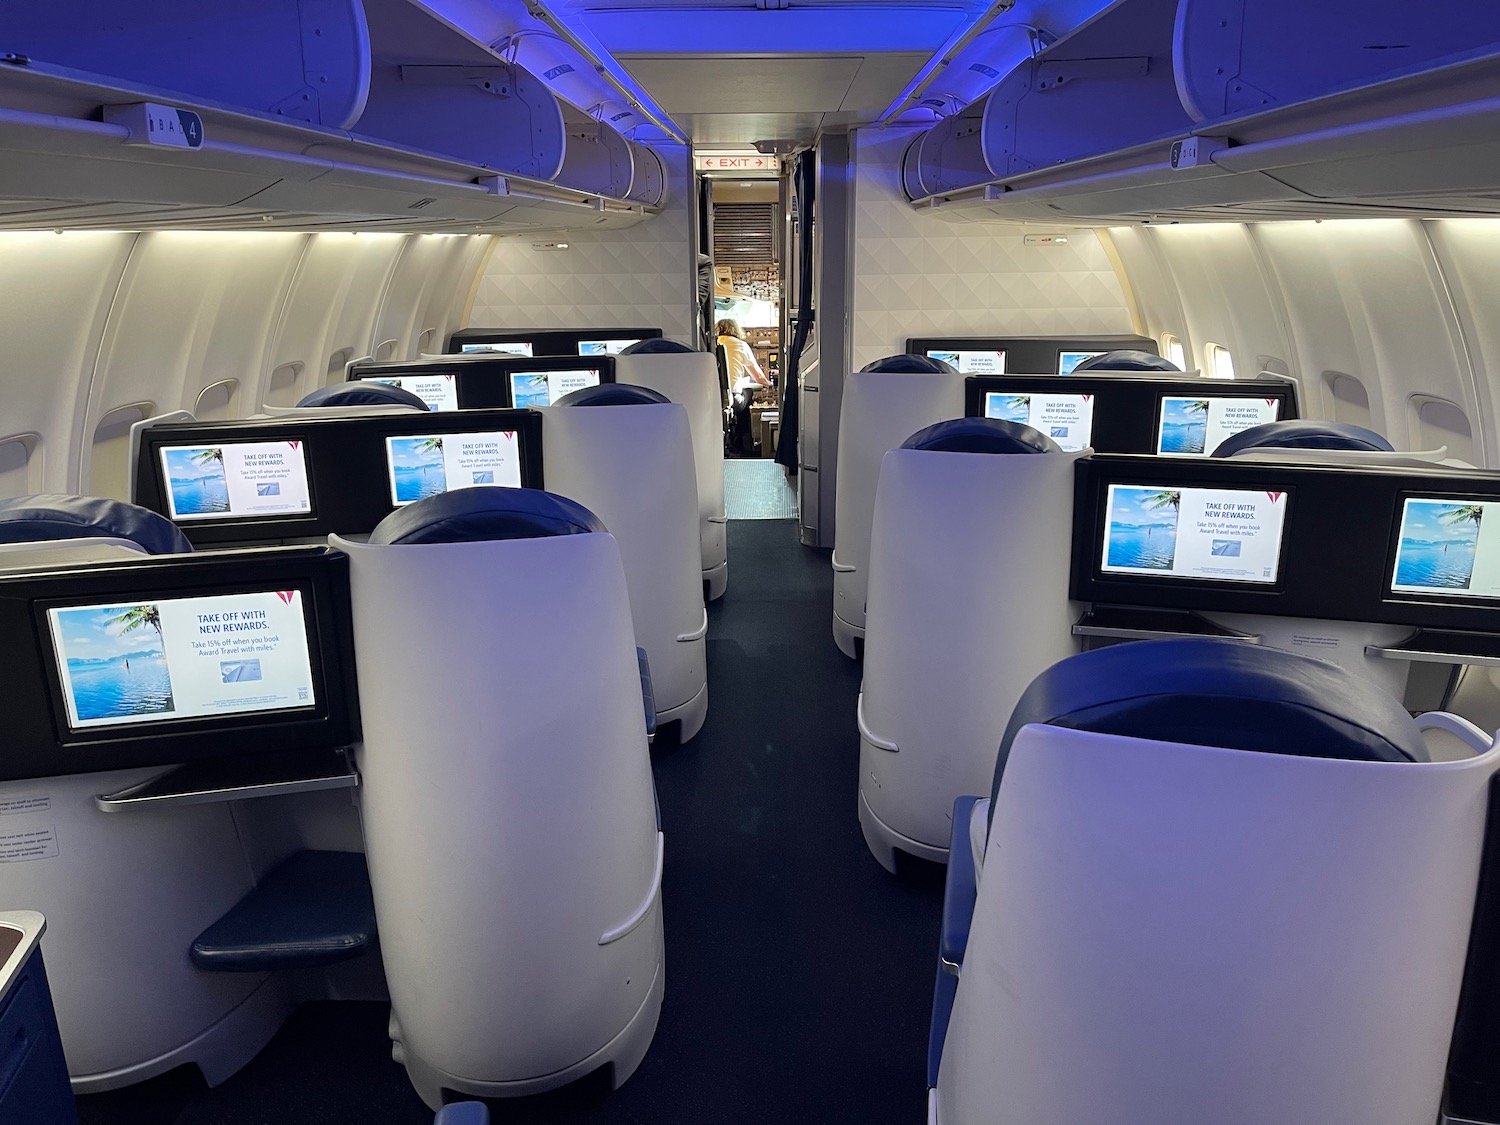 Review: Delta Comfort+ (757-200), San Francisco to New York - The